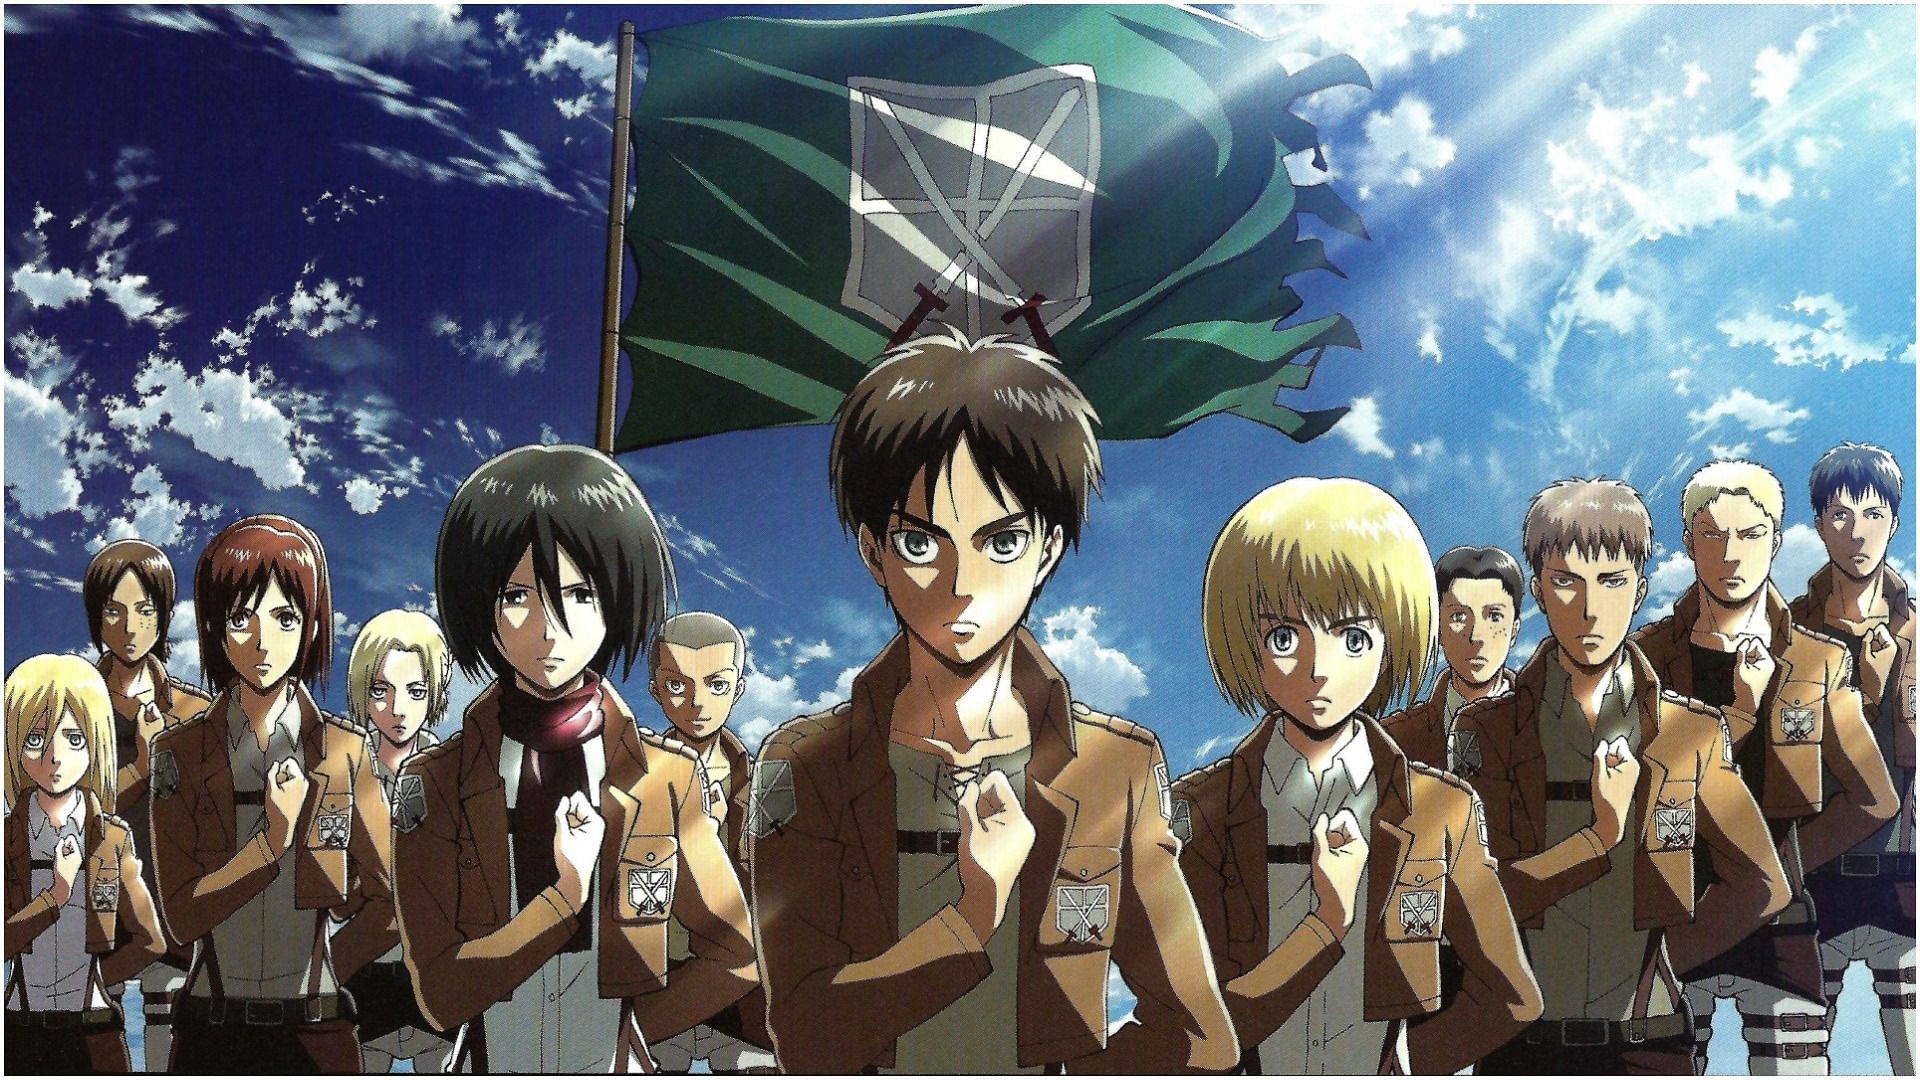 All characters of Attack on Titan as seen in the anime (Image via Wit Studio)